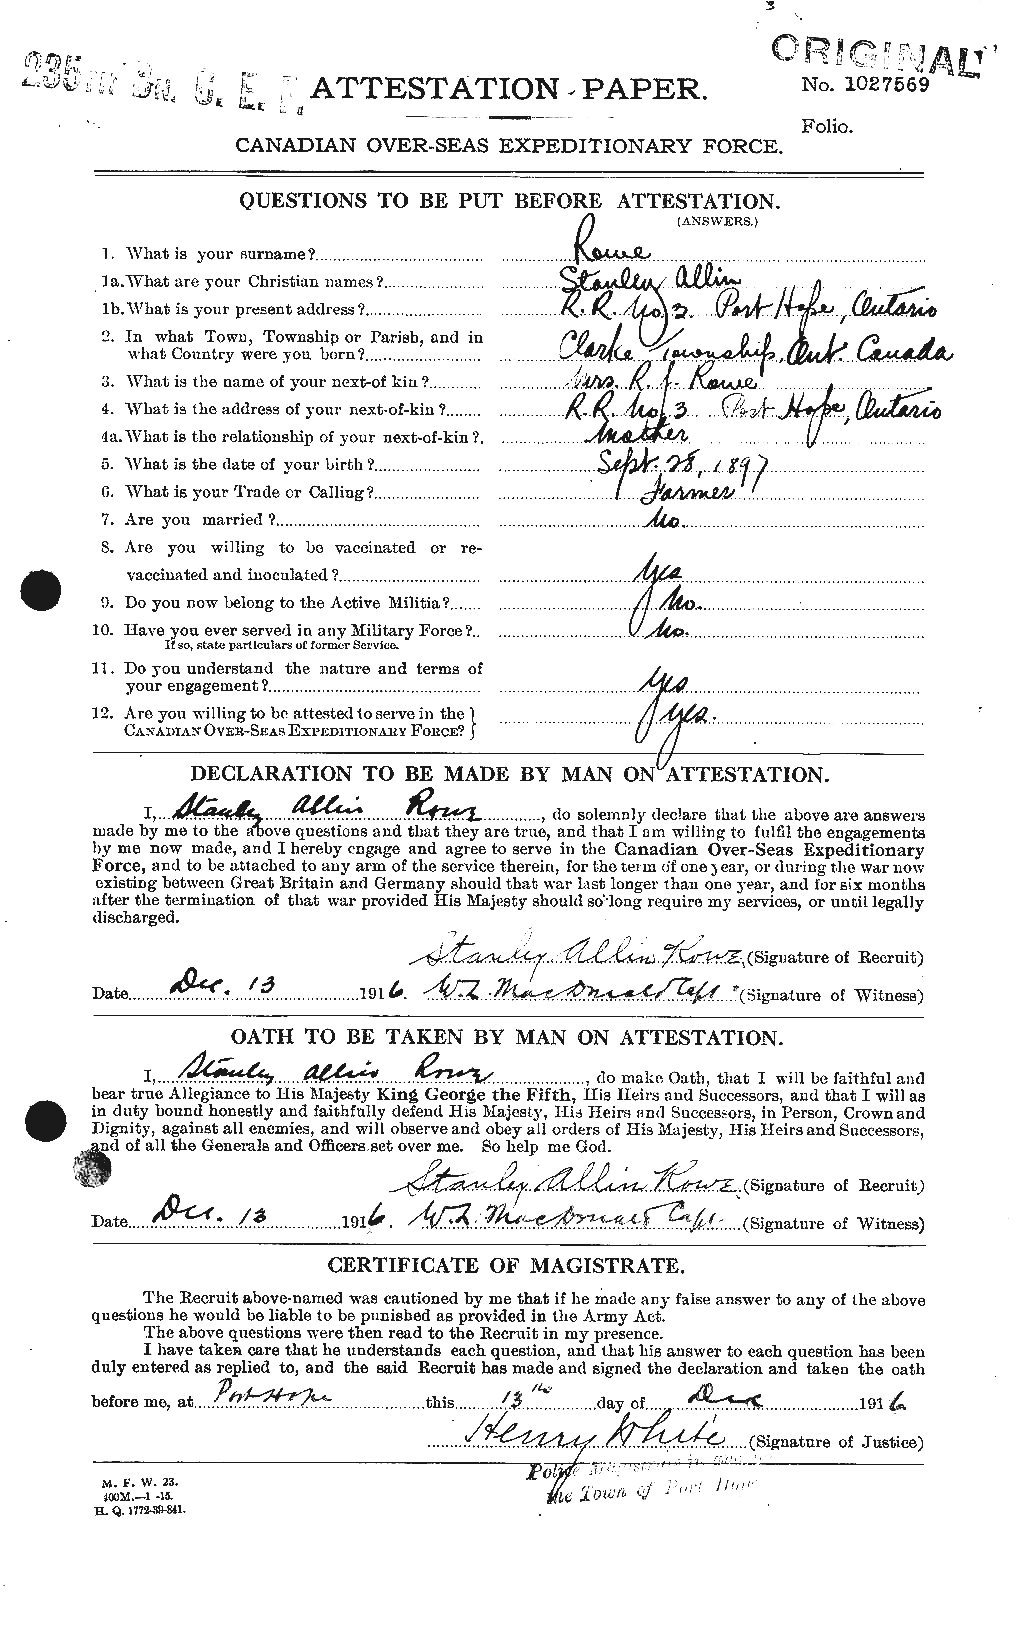 Personnel Records of the First World War - CEF 615990a